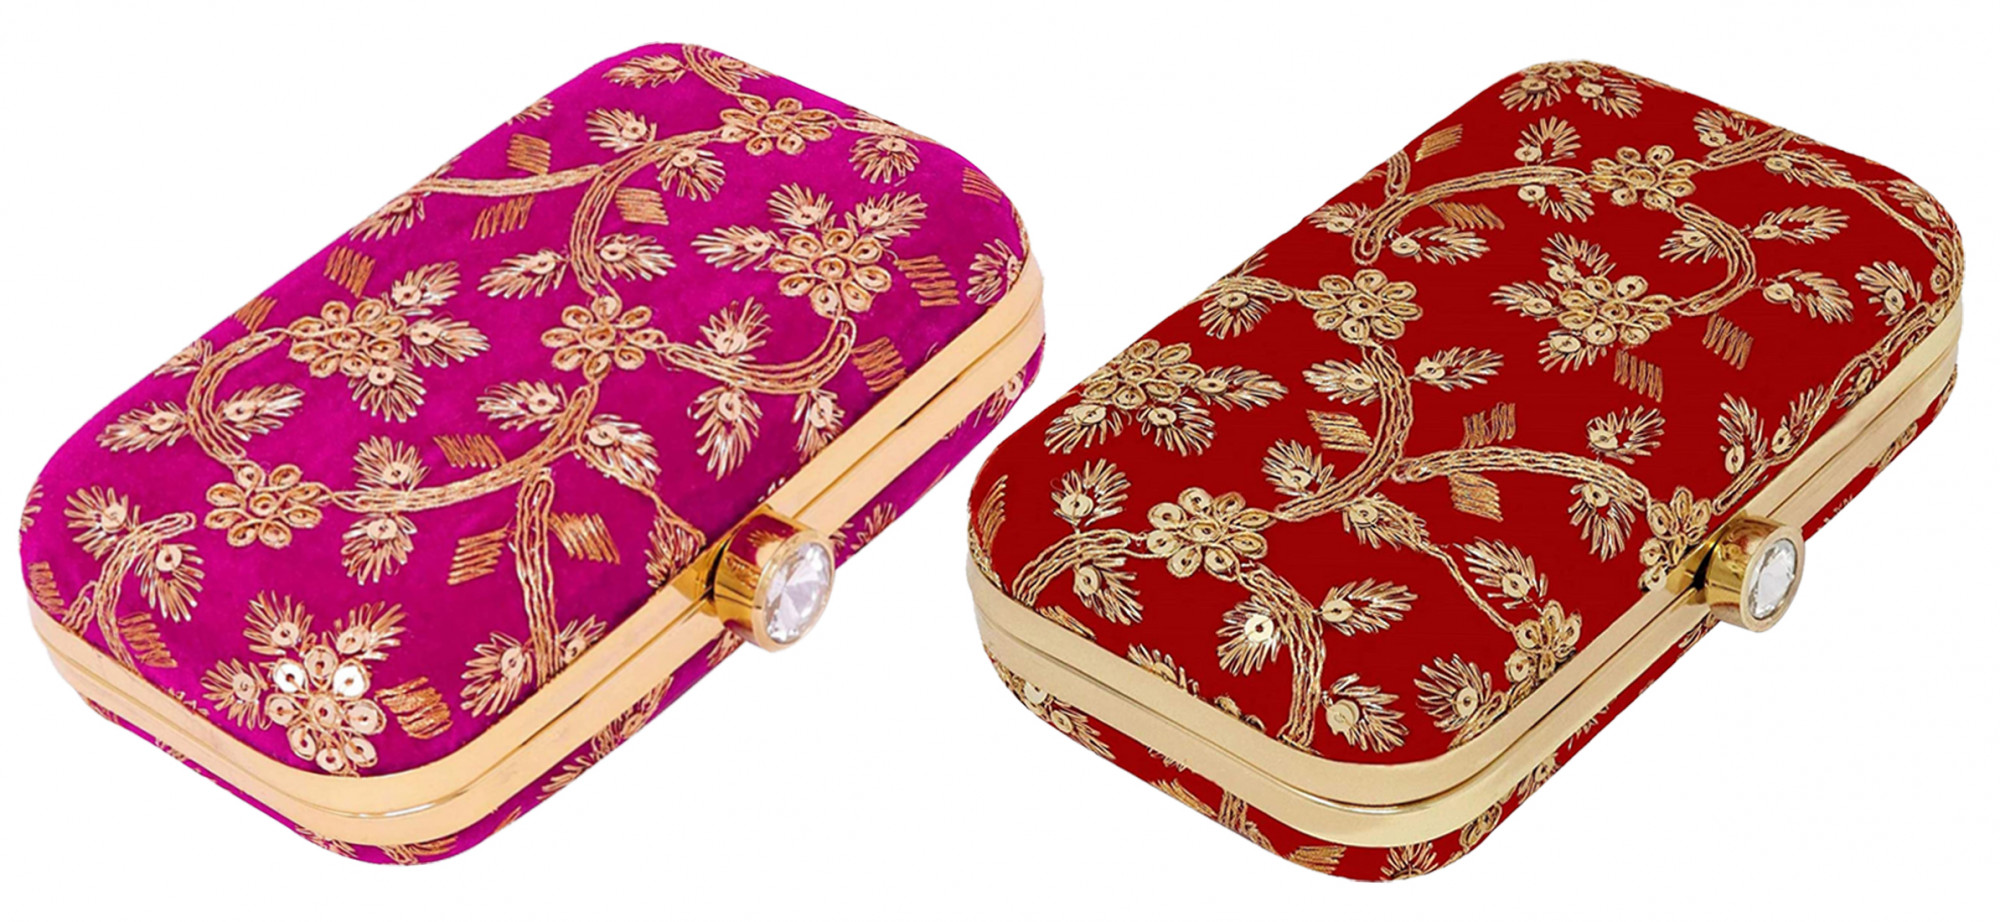 Kuber Industries Party Wear Clutch Bag Purse Handbag For Bridal, Casual, Party, Wedding,Set Of 2 (Pink & Maroon)-KUBMRT11880